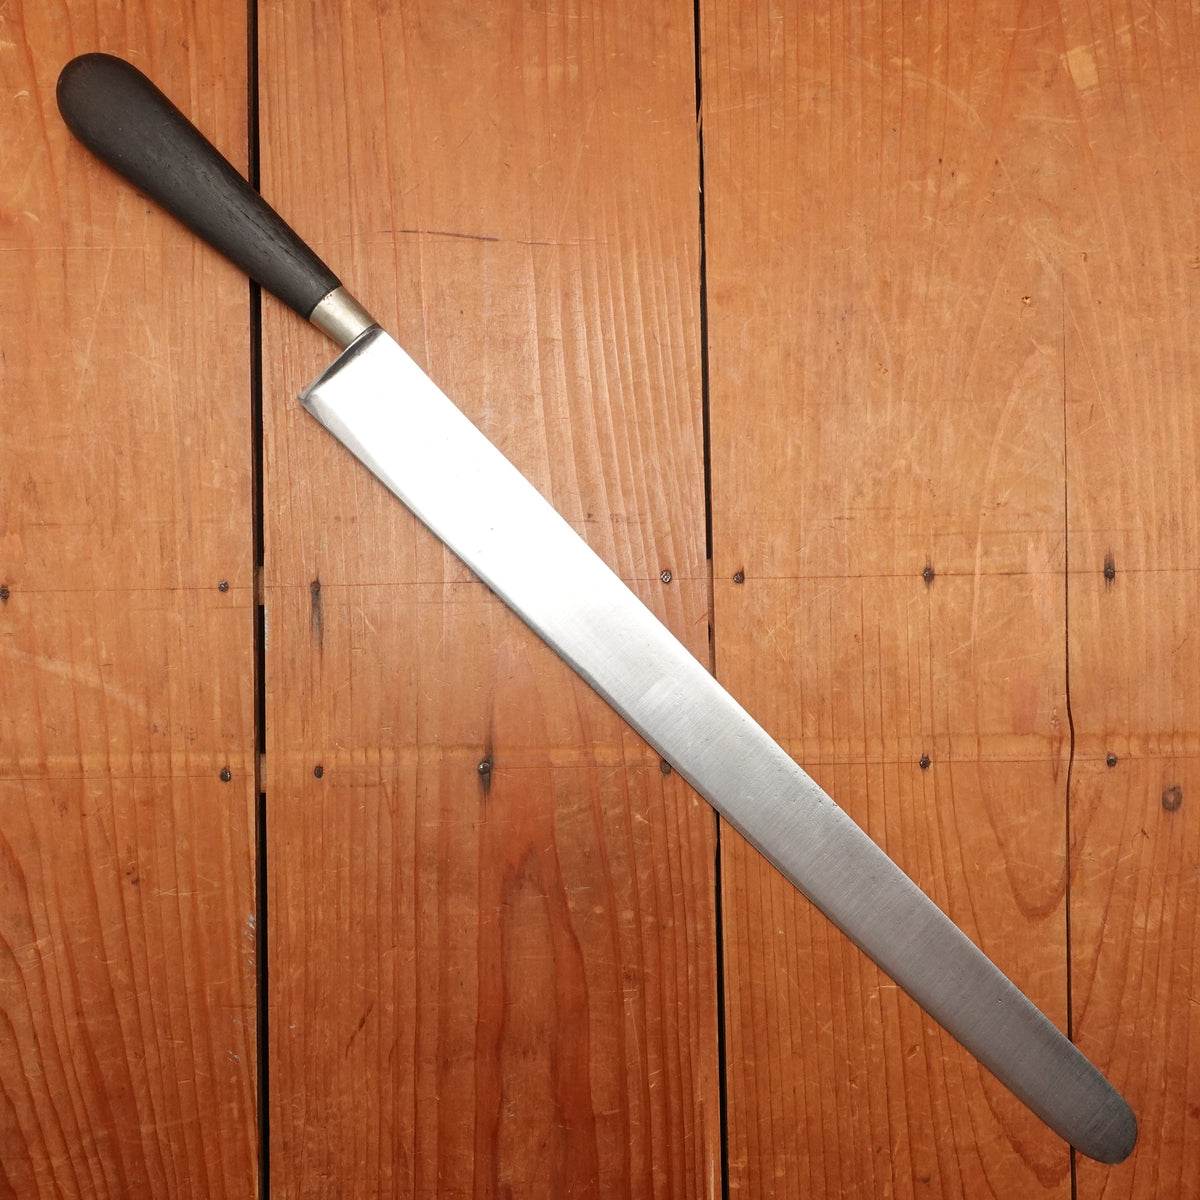 Letuaire Toulon 14.25" Semi Flex Slicer early 20th or 19th C -Thiers?